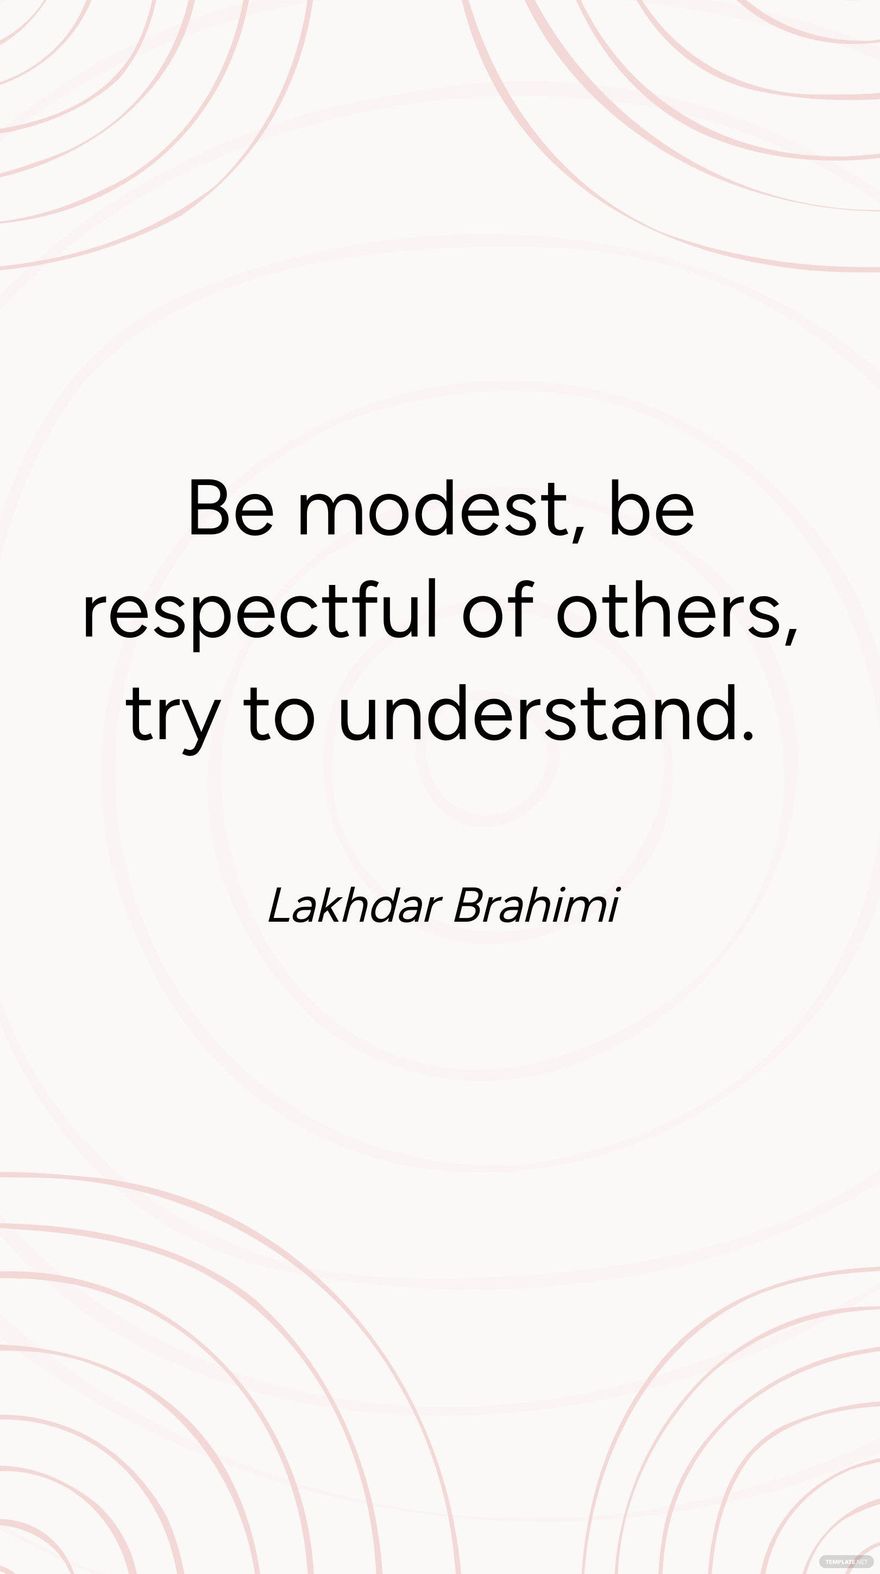 Lakhdar Brahimi - Be modest, be respectful of others, try to understand.